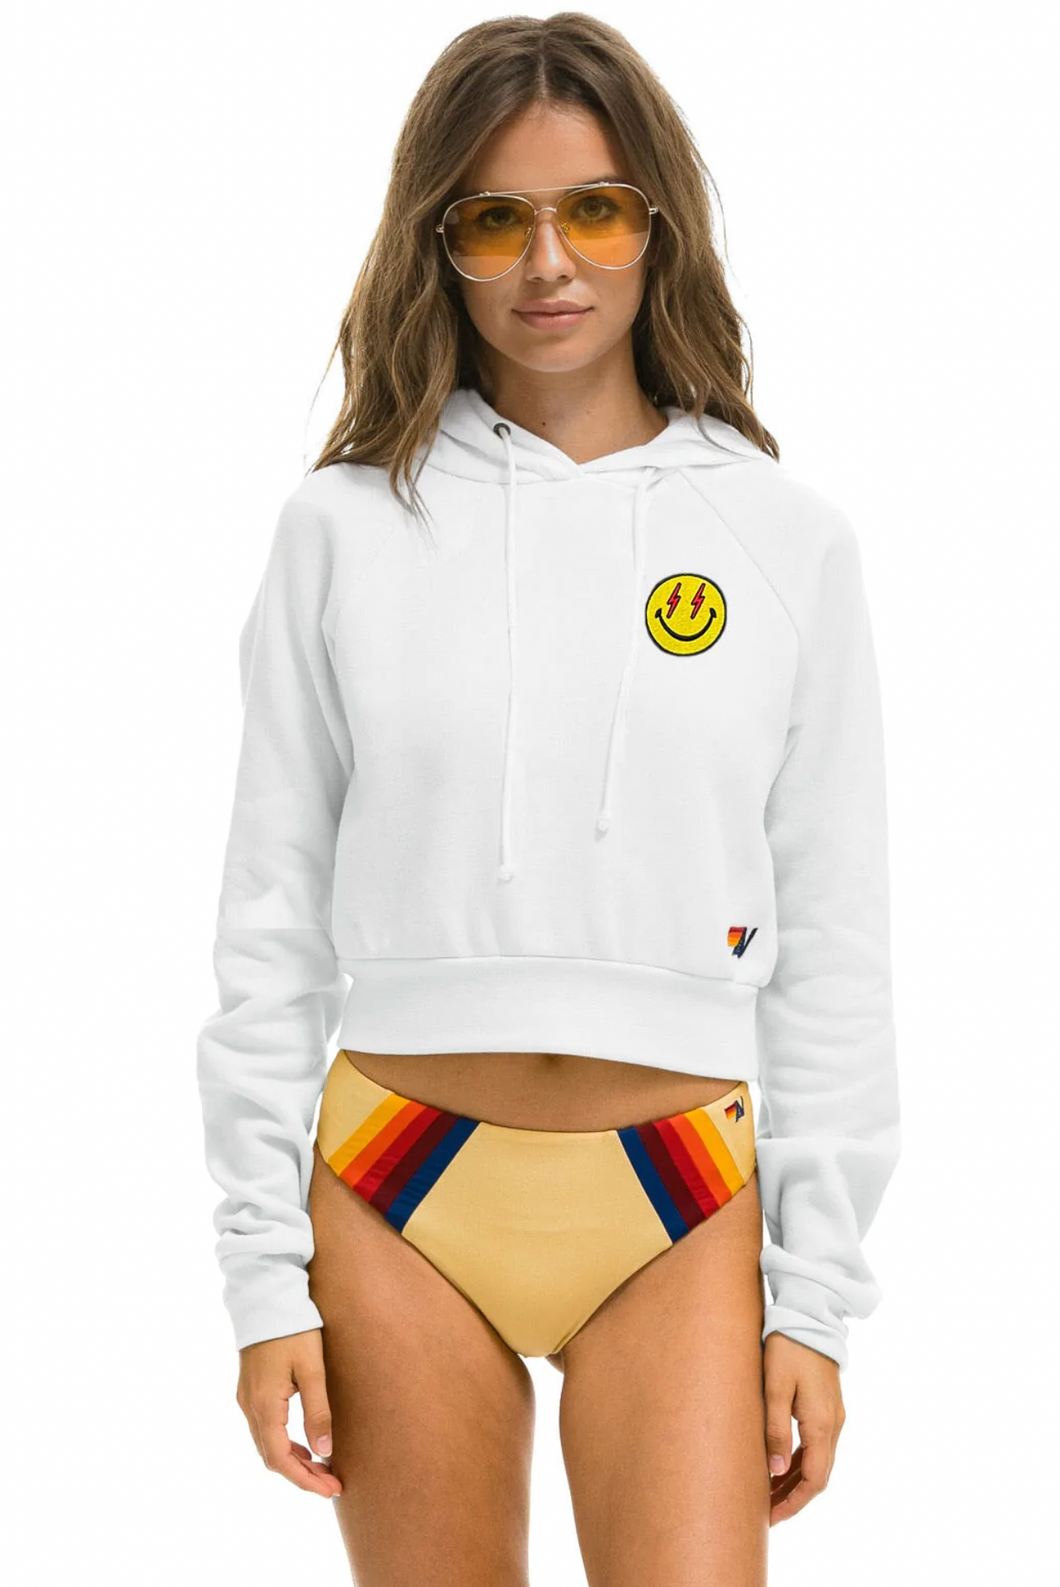 AVIATOR NATION SMILEY BOLT EYES CROPPED HOODIE - WHITE